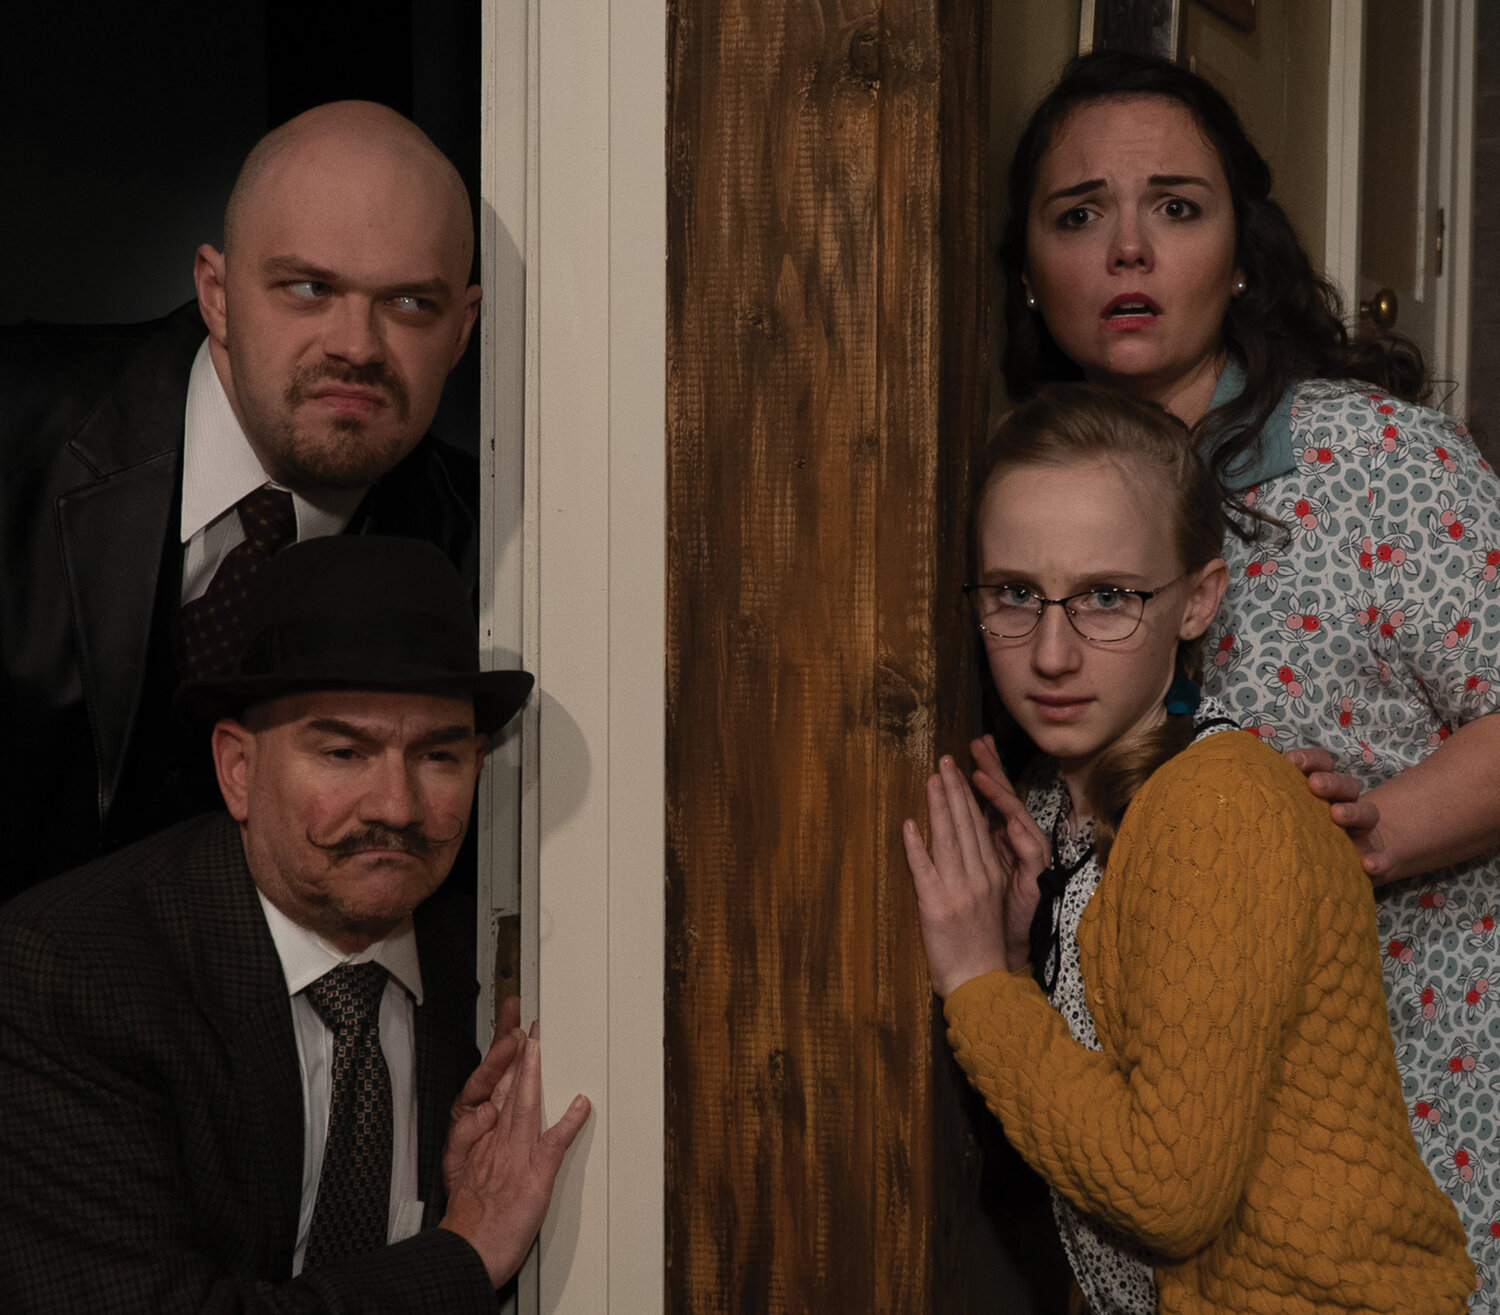 As the climax builds, con men Roat, played by Henry Lorch, and Carlino, played by Tony Provenzola, quietly wait on Susan, played by Kristen Bennett, and Gloria, played by Amelia Benson, in “Wait Until Dark,” being performed by Love Street Playhouse.